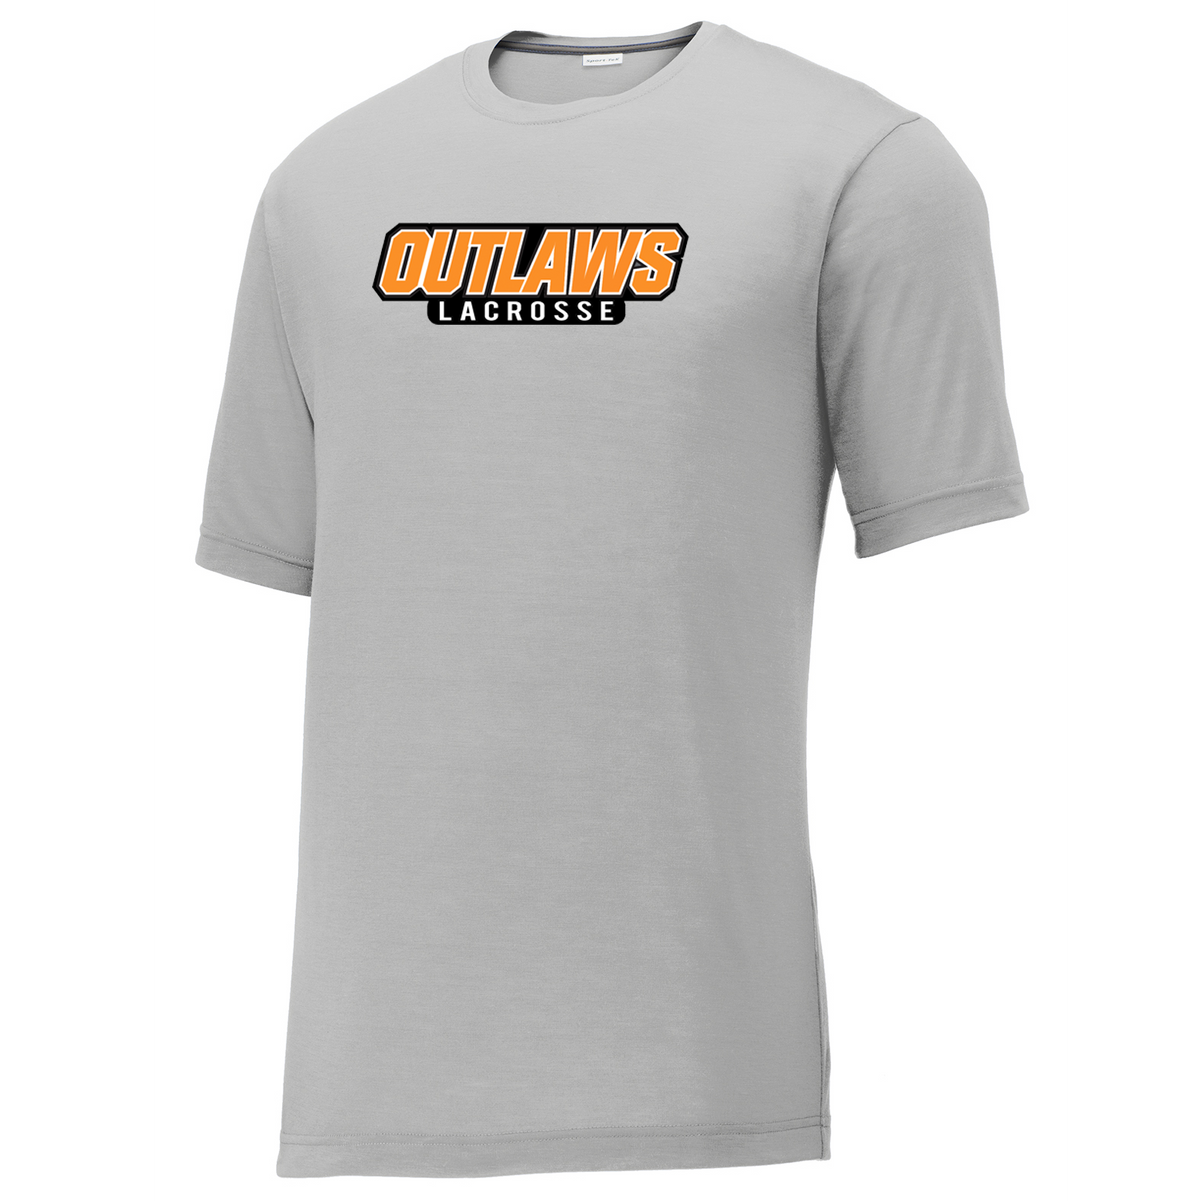 Lake Norman Outlaws CottonTouch Performance T-Shirt